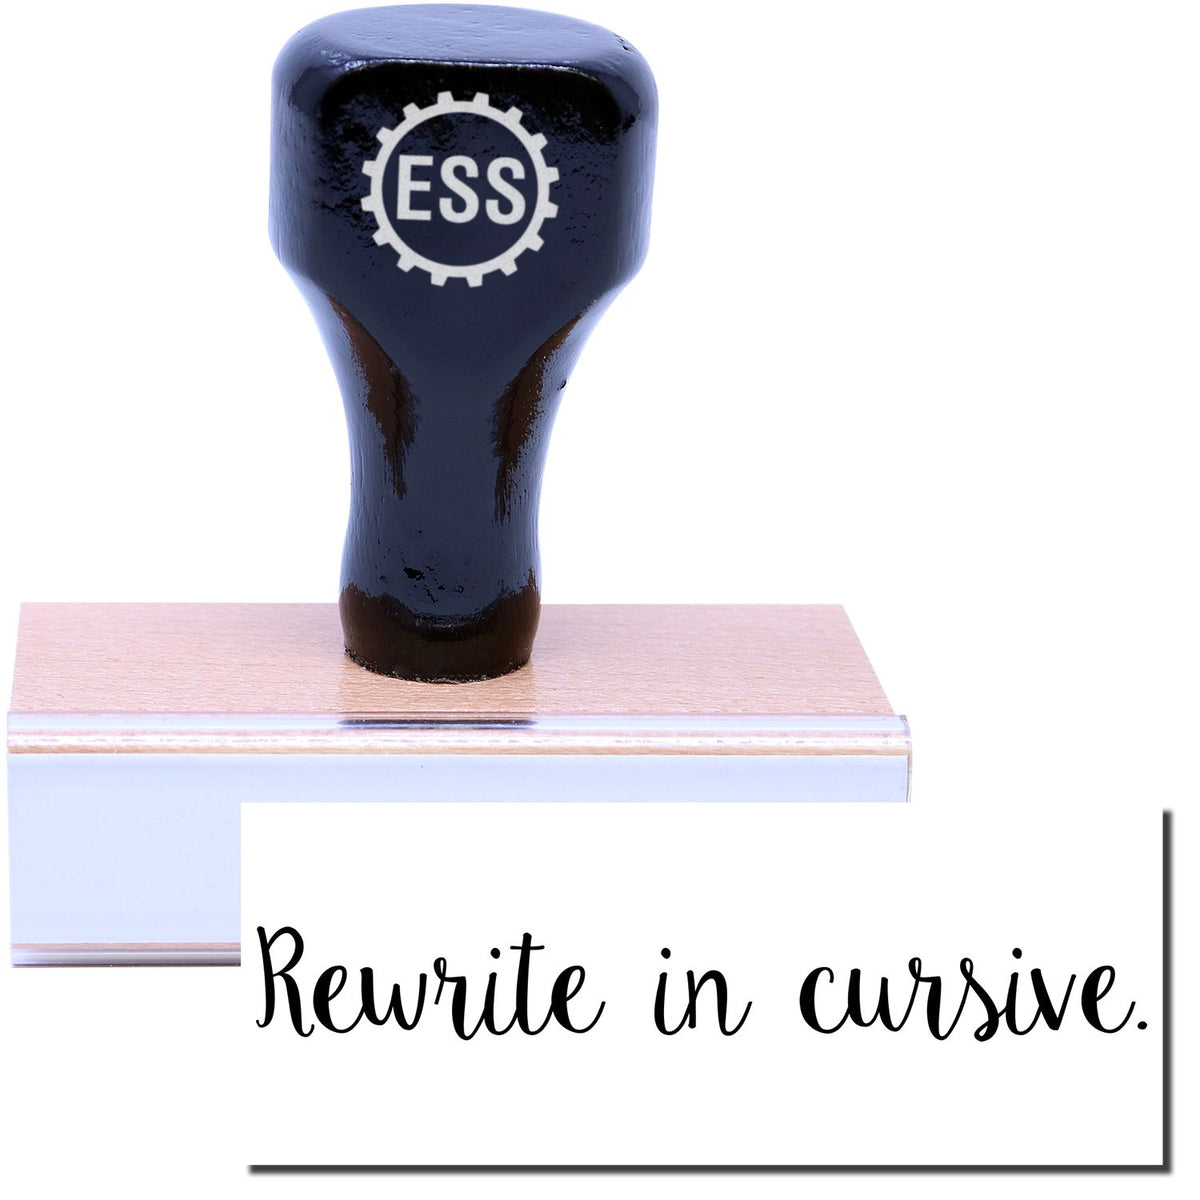 A stock office rubber stamp with a stamped image showing how the text &quot;Rewrite in cursive.&quot; in a script cursive font is displayed after stamping.